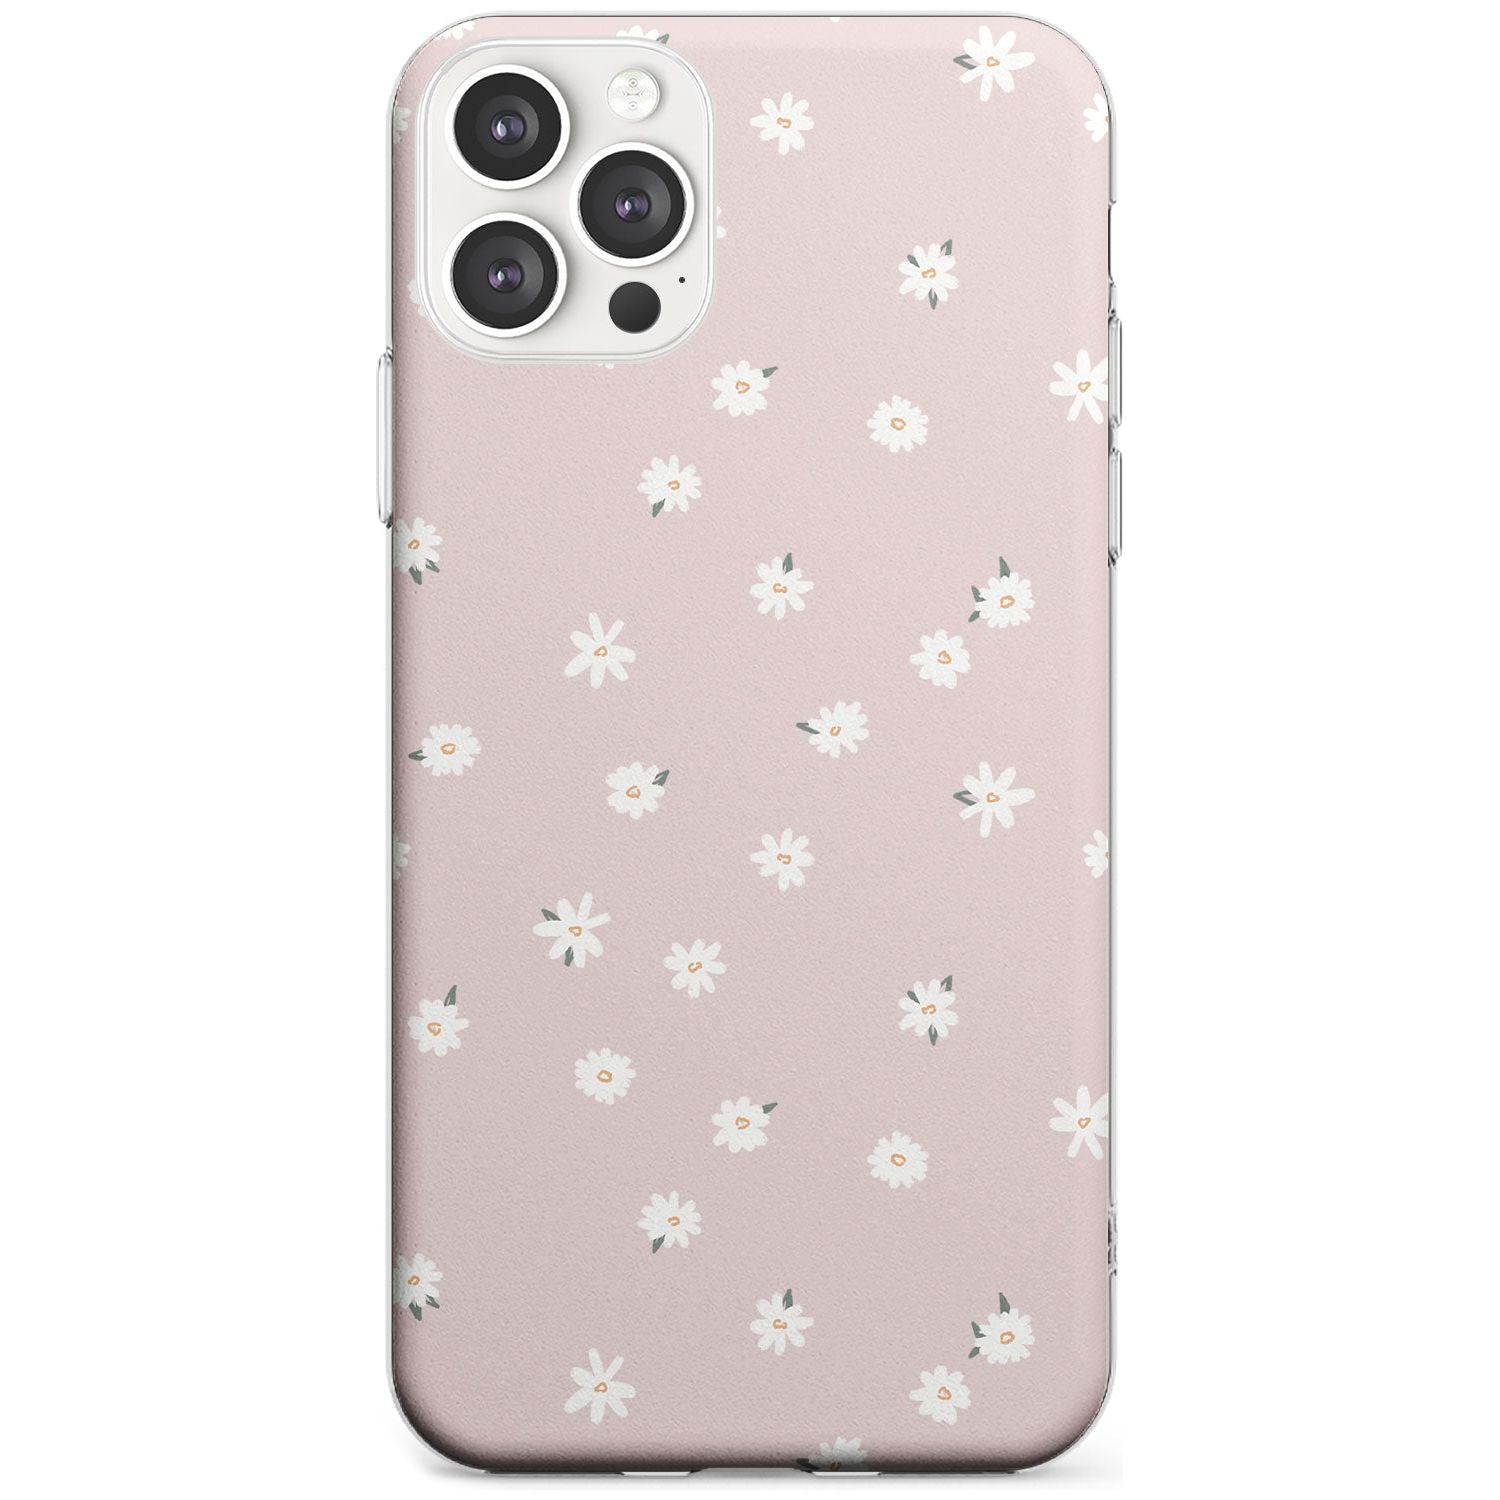 Painted Daises on Pink - Cute Floral Daisy Design Black Impact Phone Case for iPhone 11 Pro Max